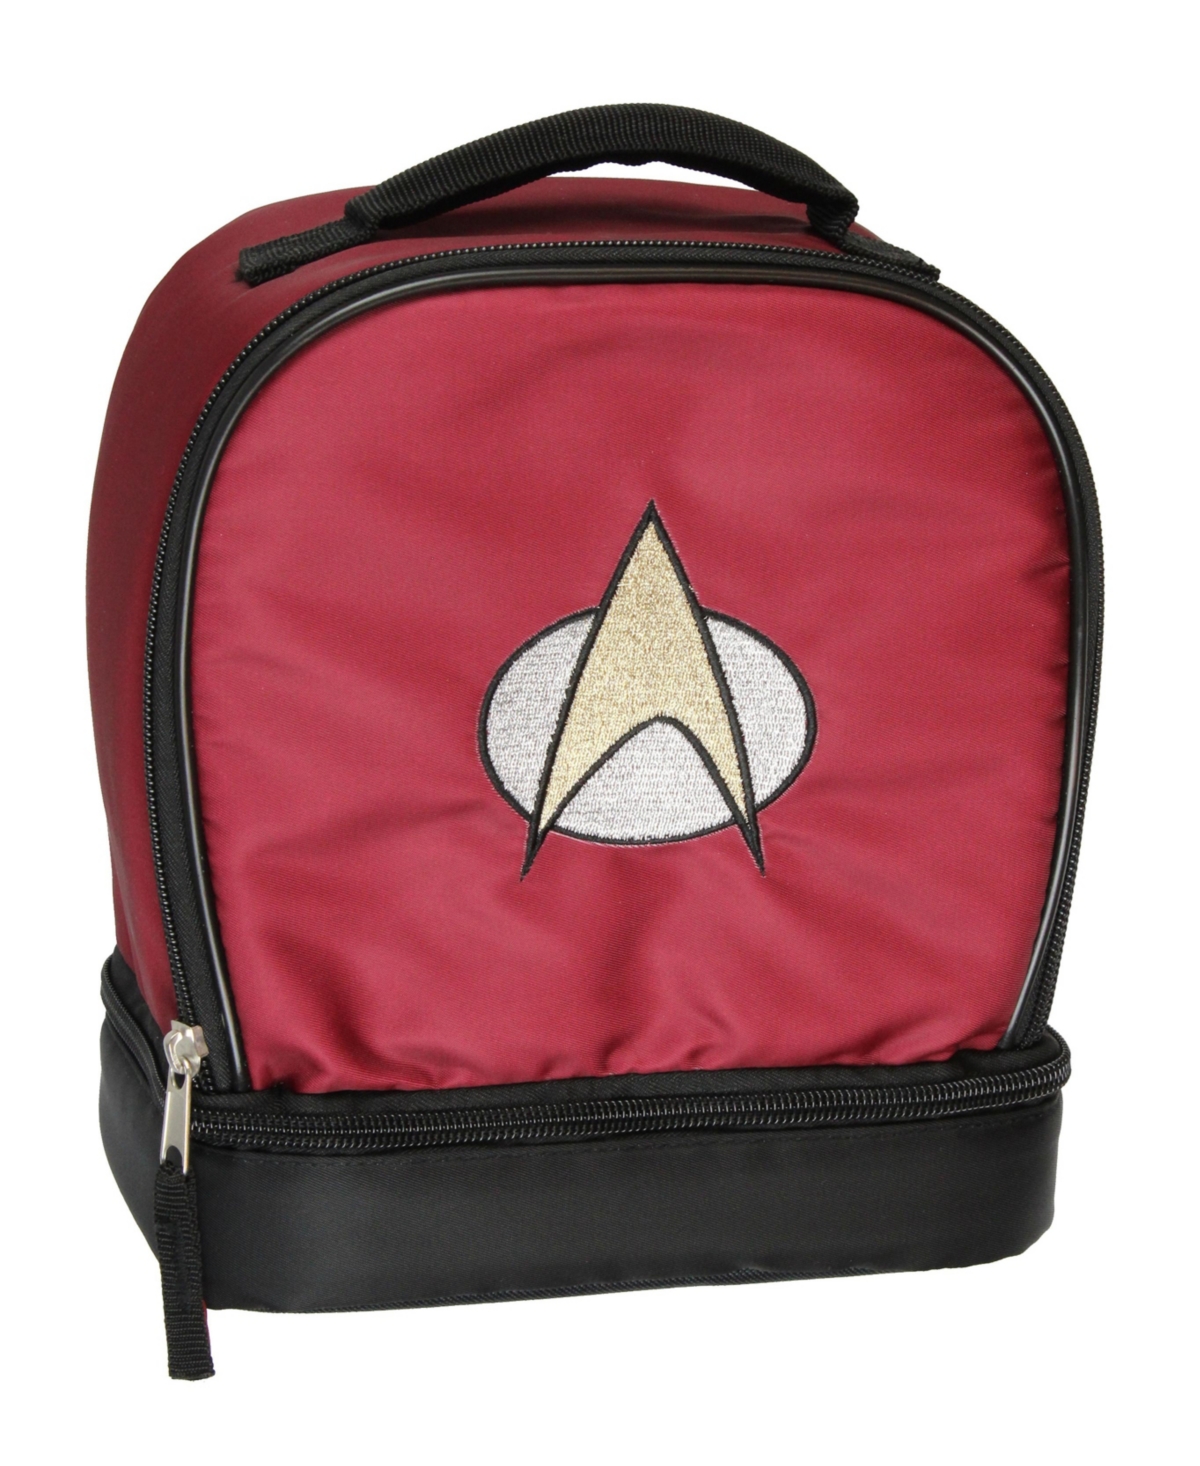 The Next Generation Picard Embroidered Starfleet Logo Dual Compartment Insulated Lunch Box Bag Tote - Red